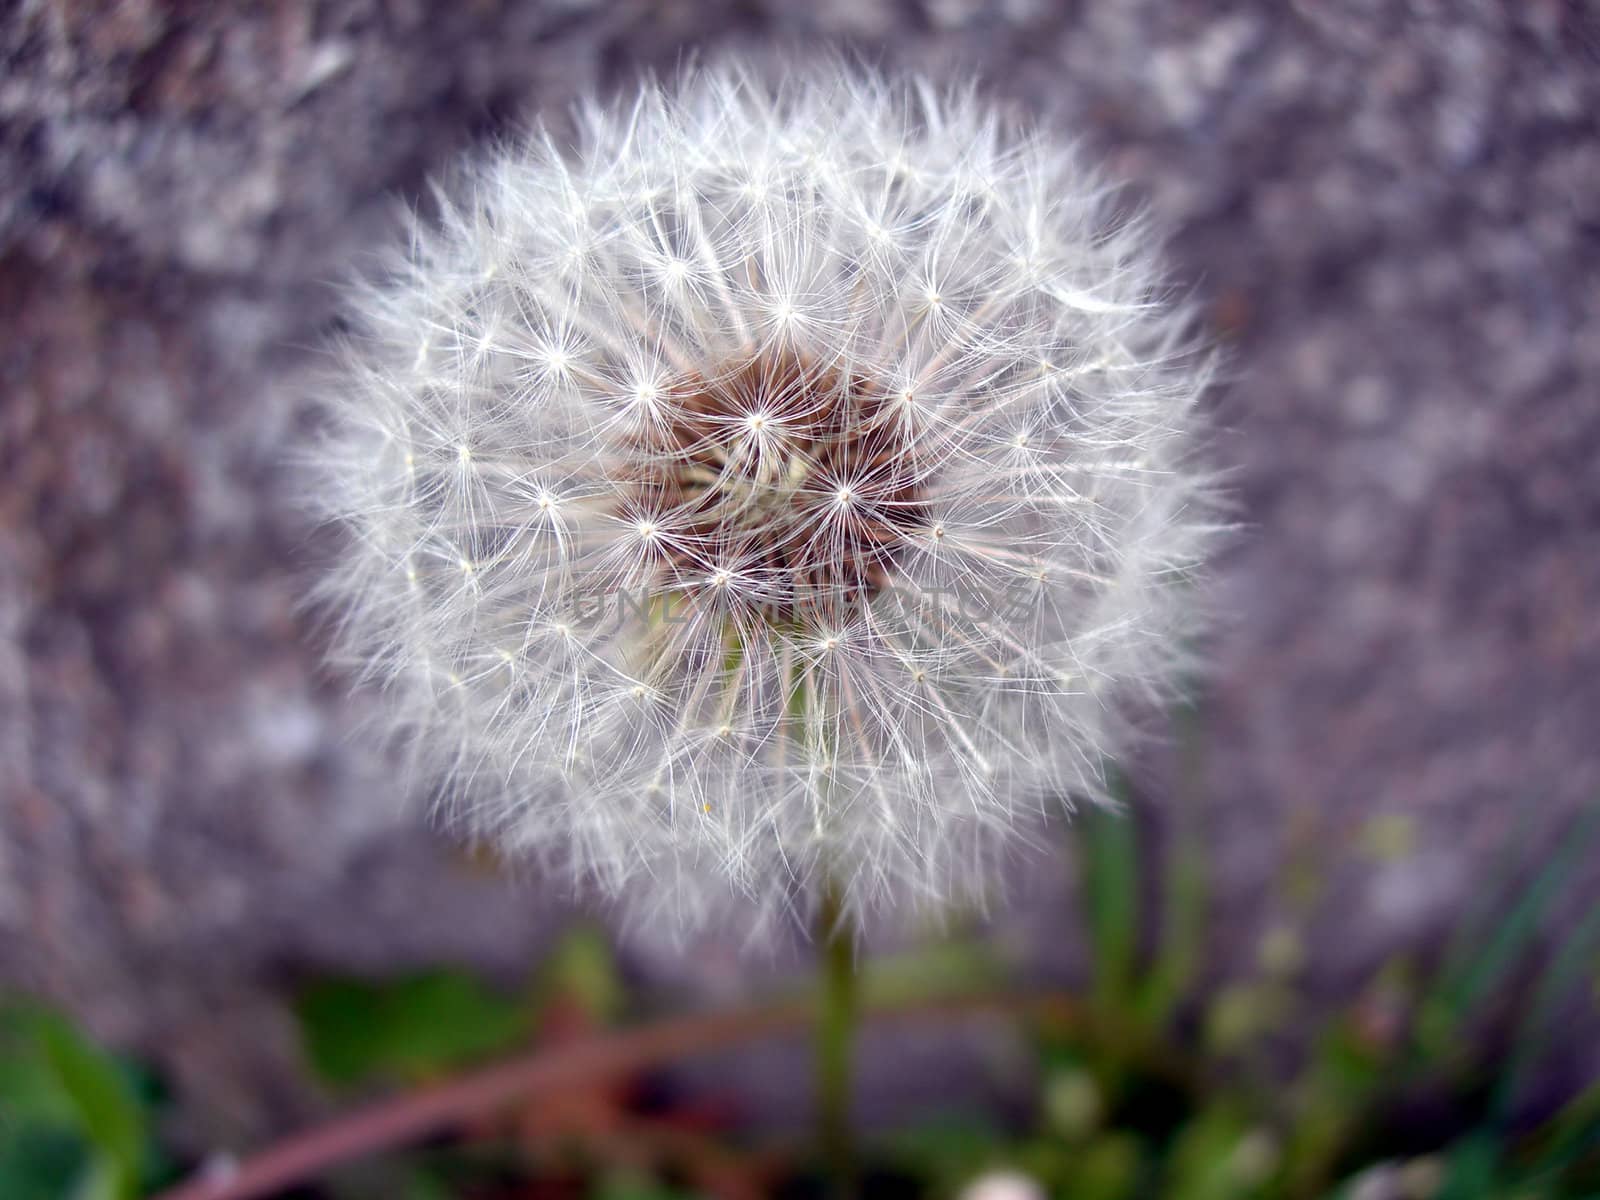 Detail of a blowball - dandelion past blossom      